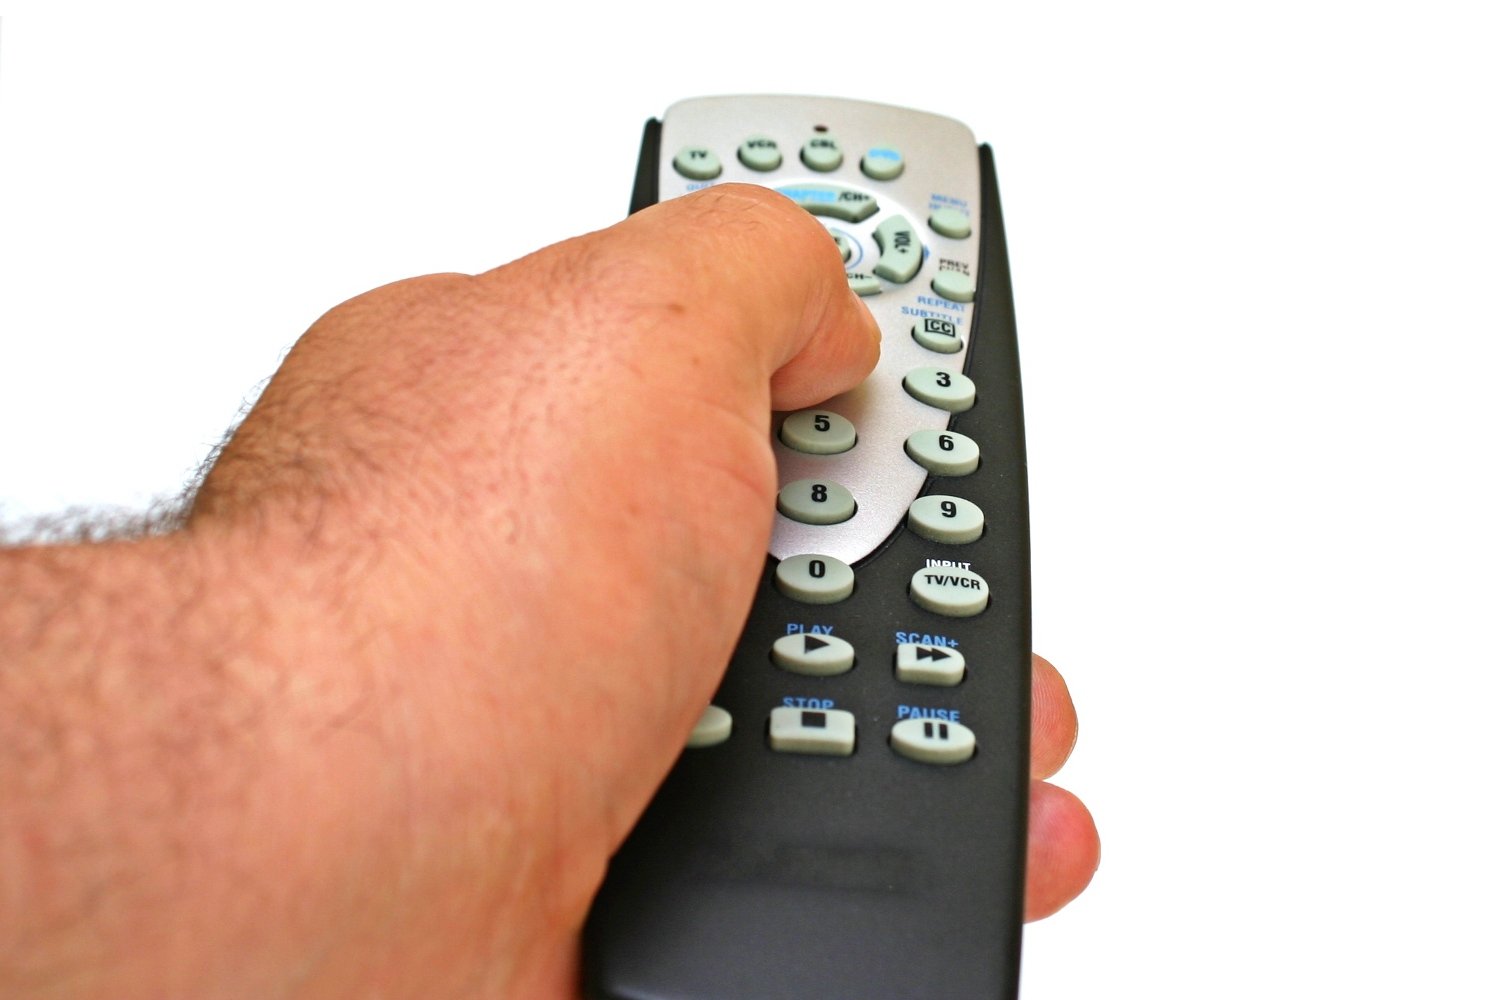 Remote control in hand isolated photo